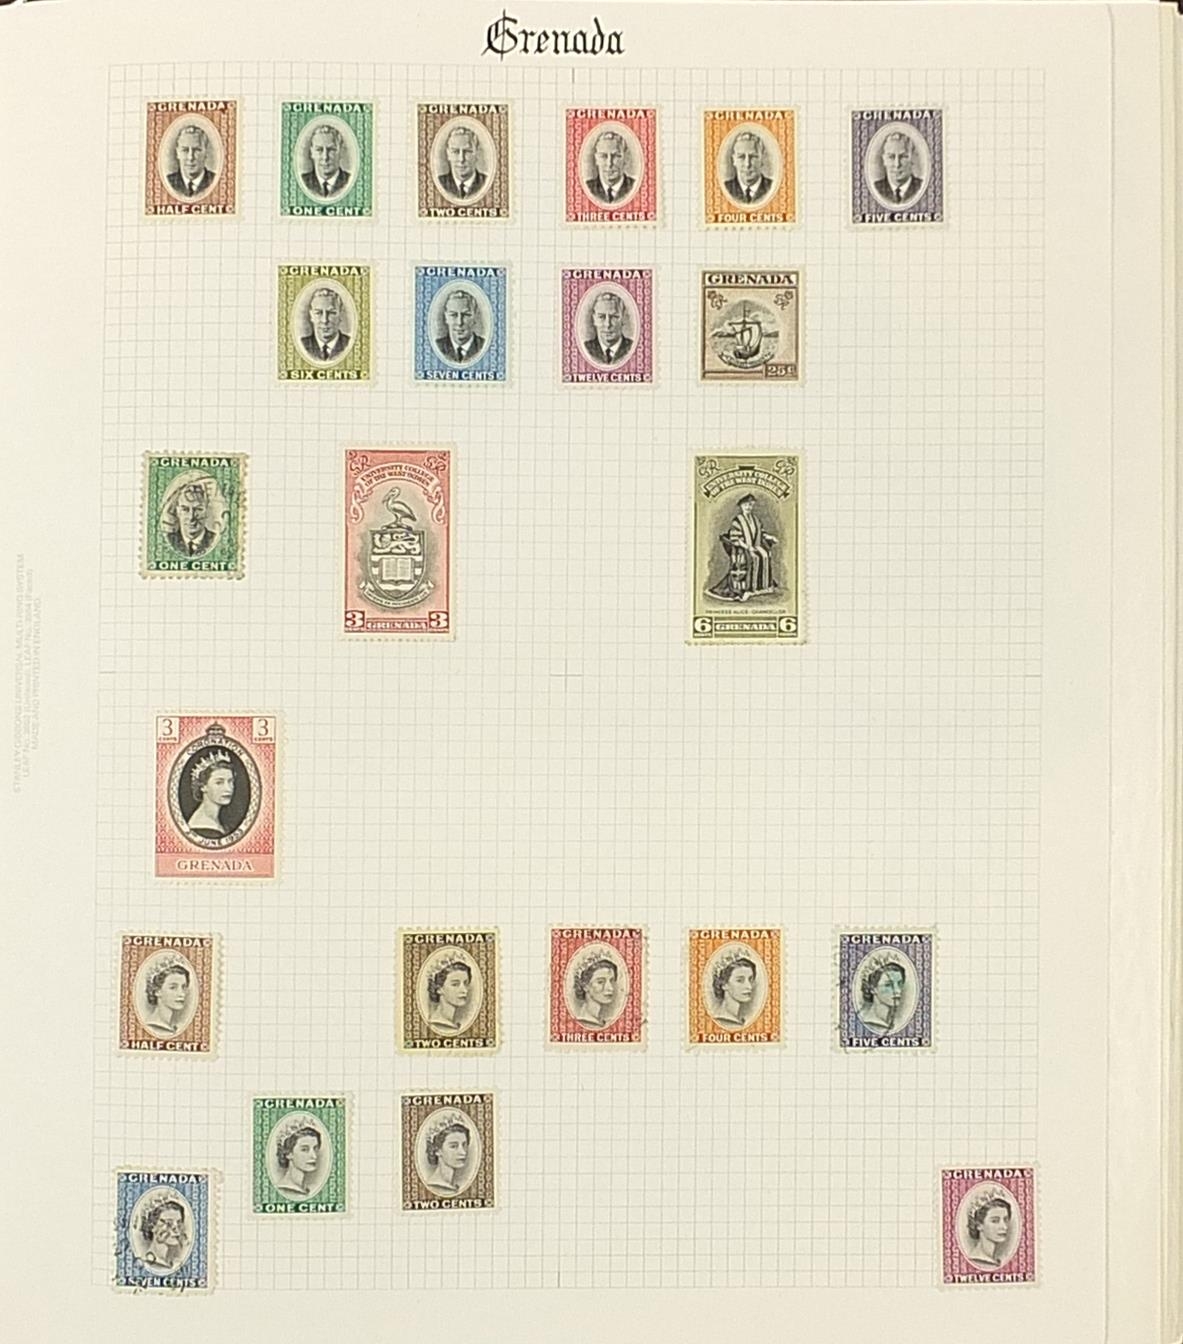 Commonwealth and colonial stamps arranged in an album including Caicos Islands, many mint - Image 3 of 6